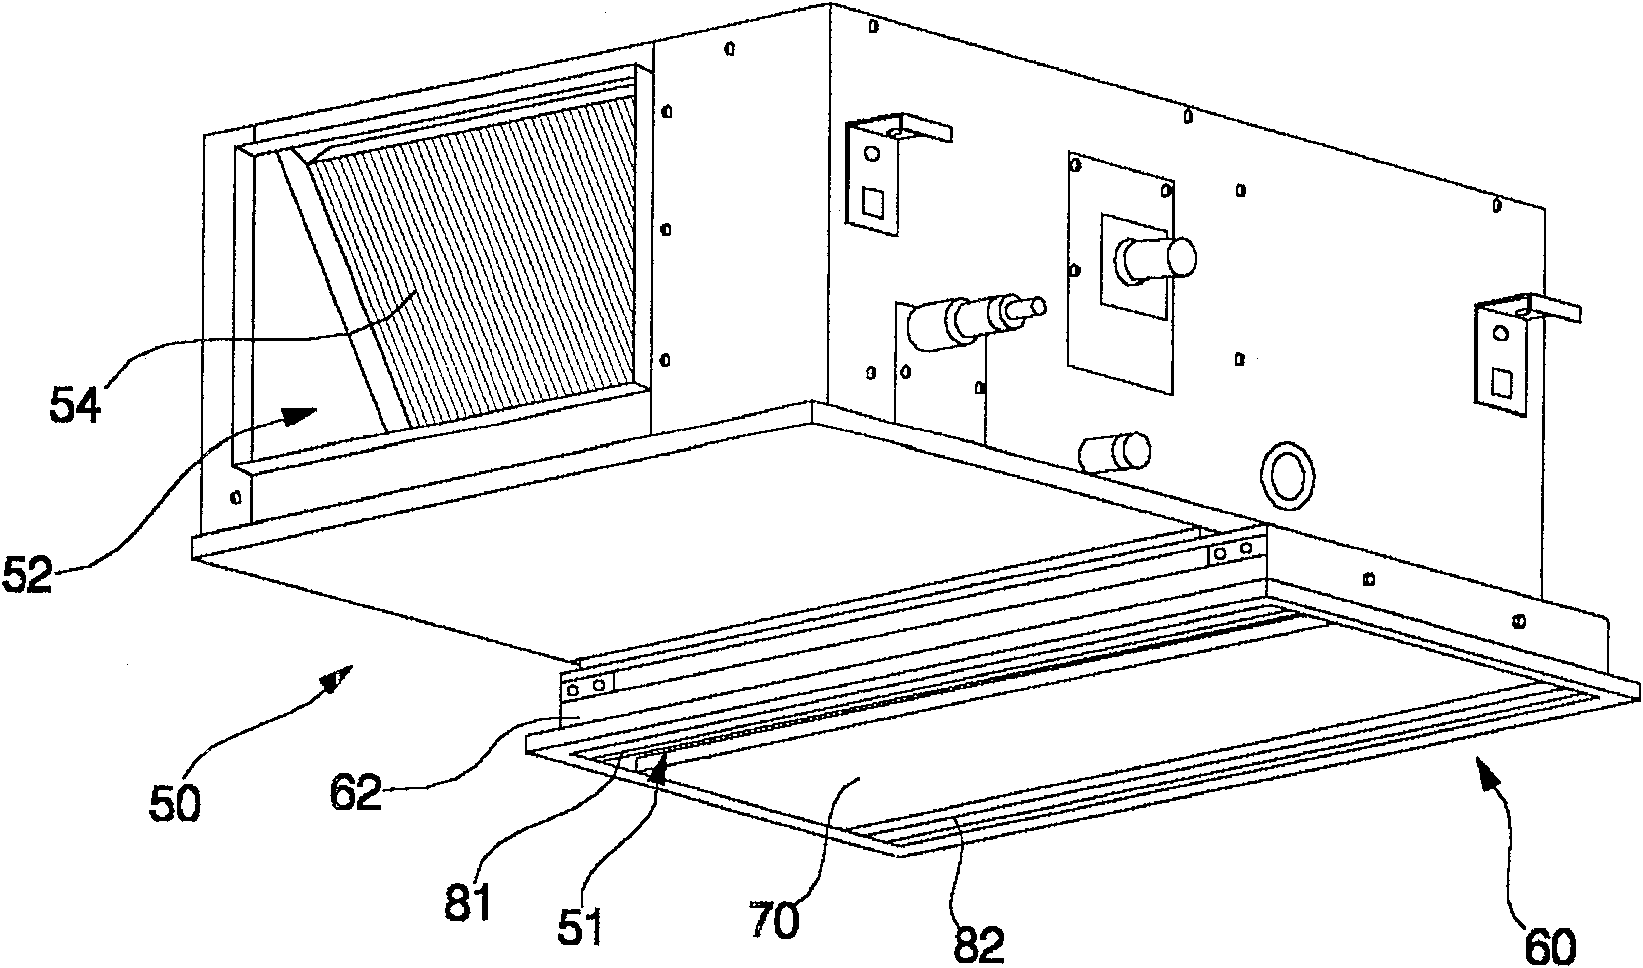 Air intake unit of ceiling type air conditioning apparatus